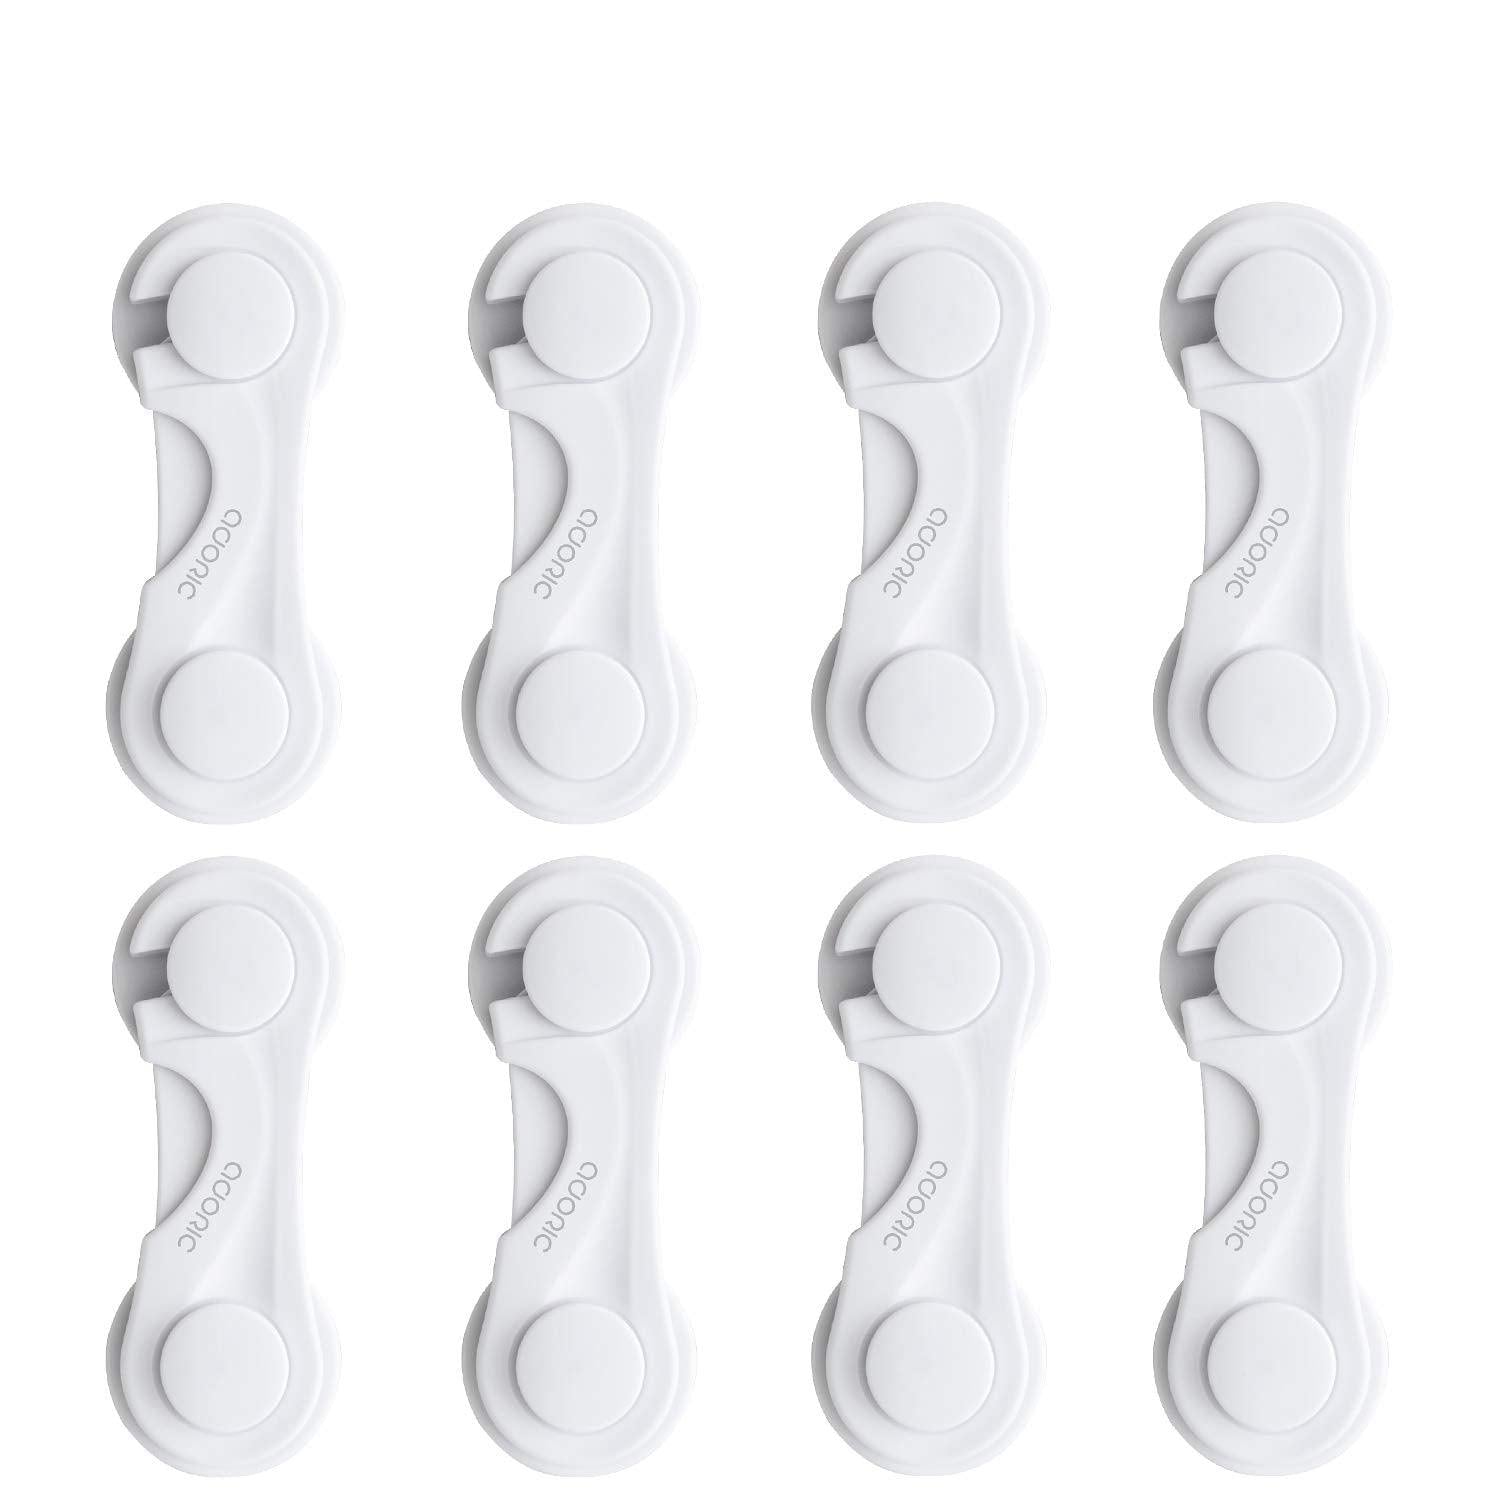 Cabinet Locks - Adoric Life Child Safety Locks 4 Pack – The Baby's